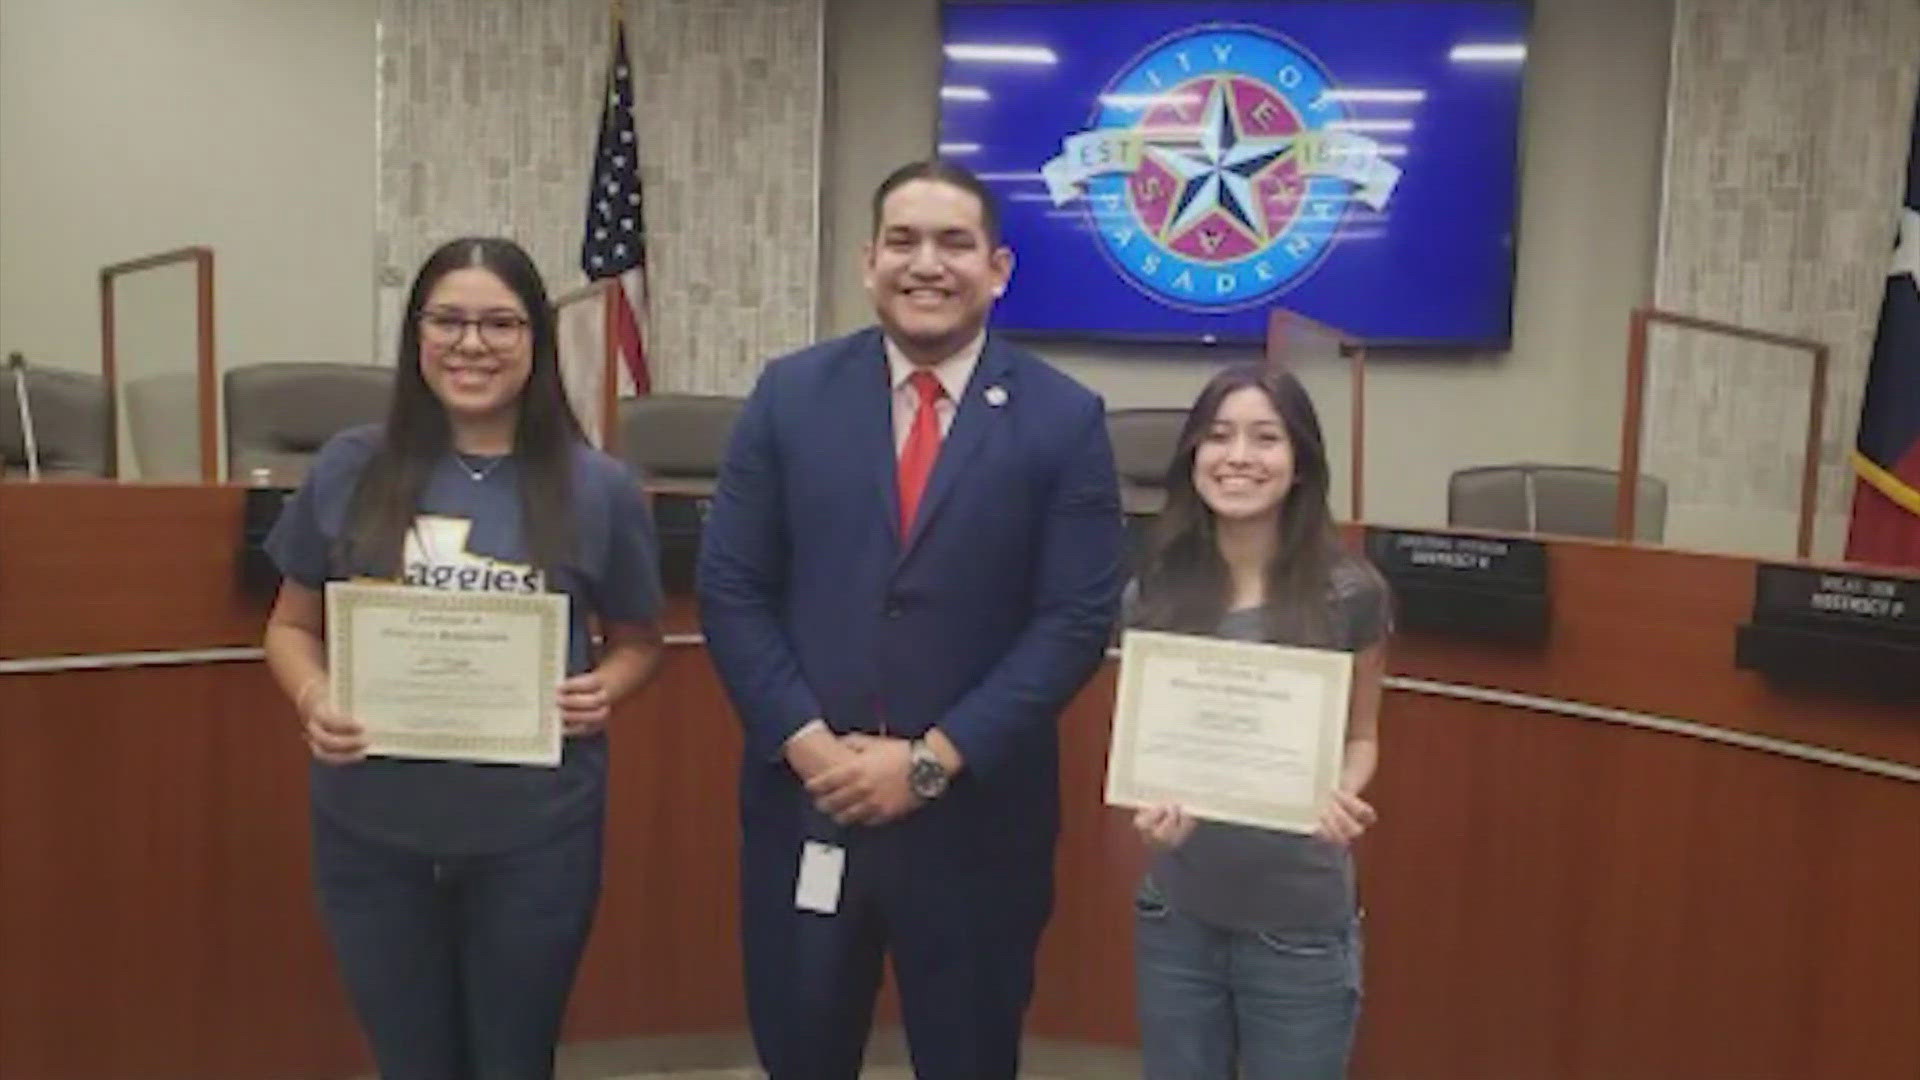 "This was the first scholarship I had received. I was super excited," Ana Pineda told us after the City of Pasadena pulled the scholarship she'd been awarded.